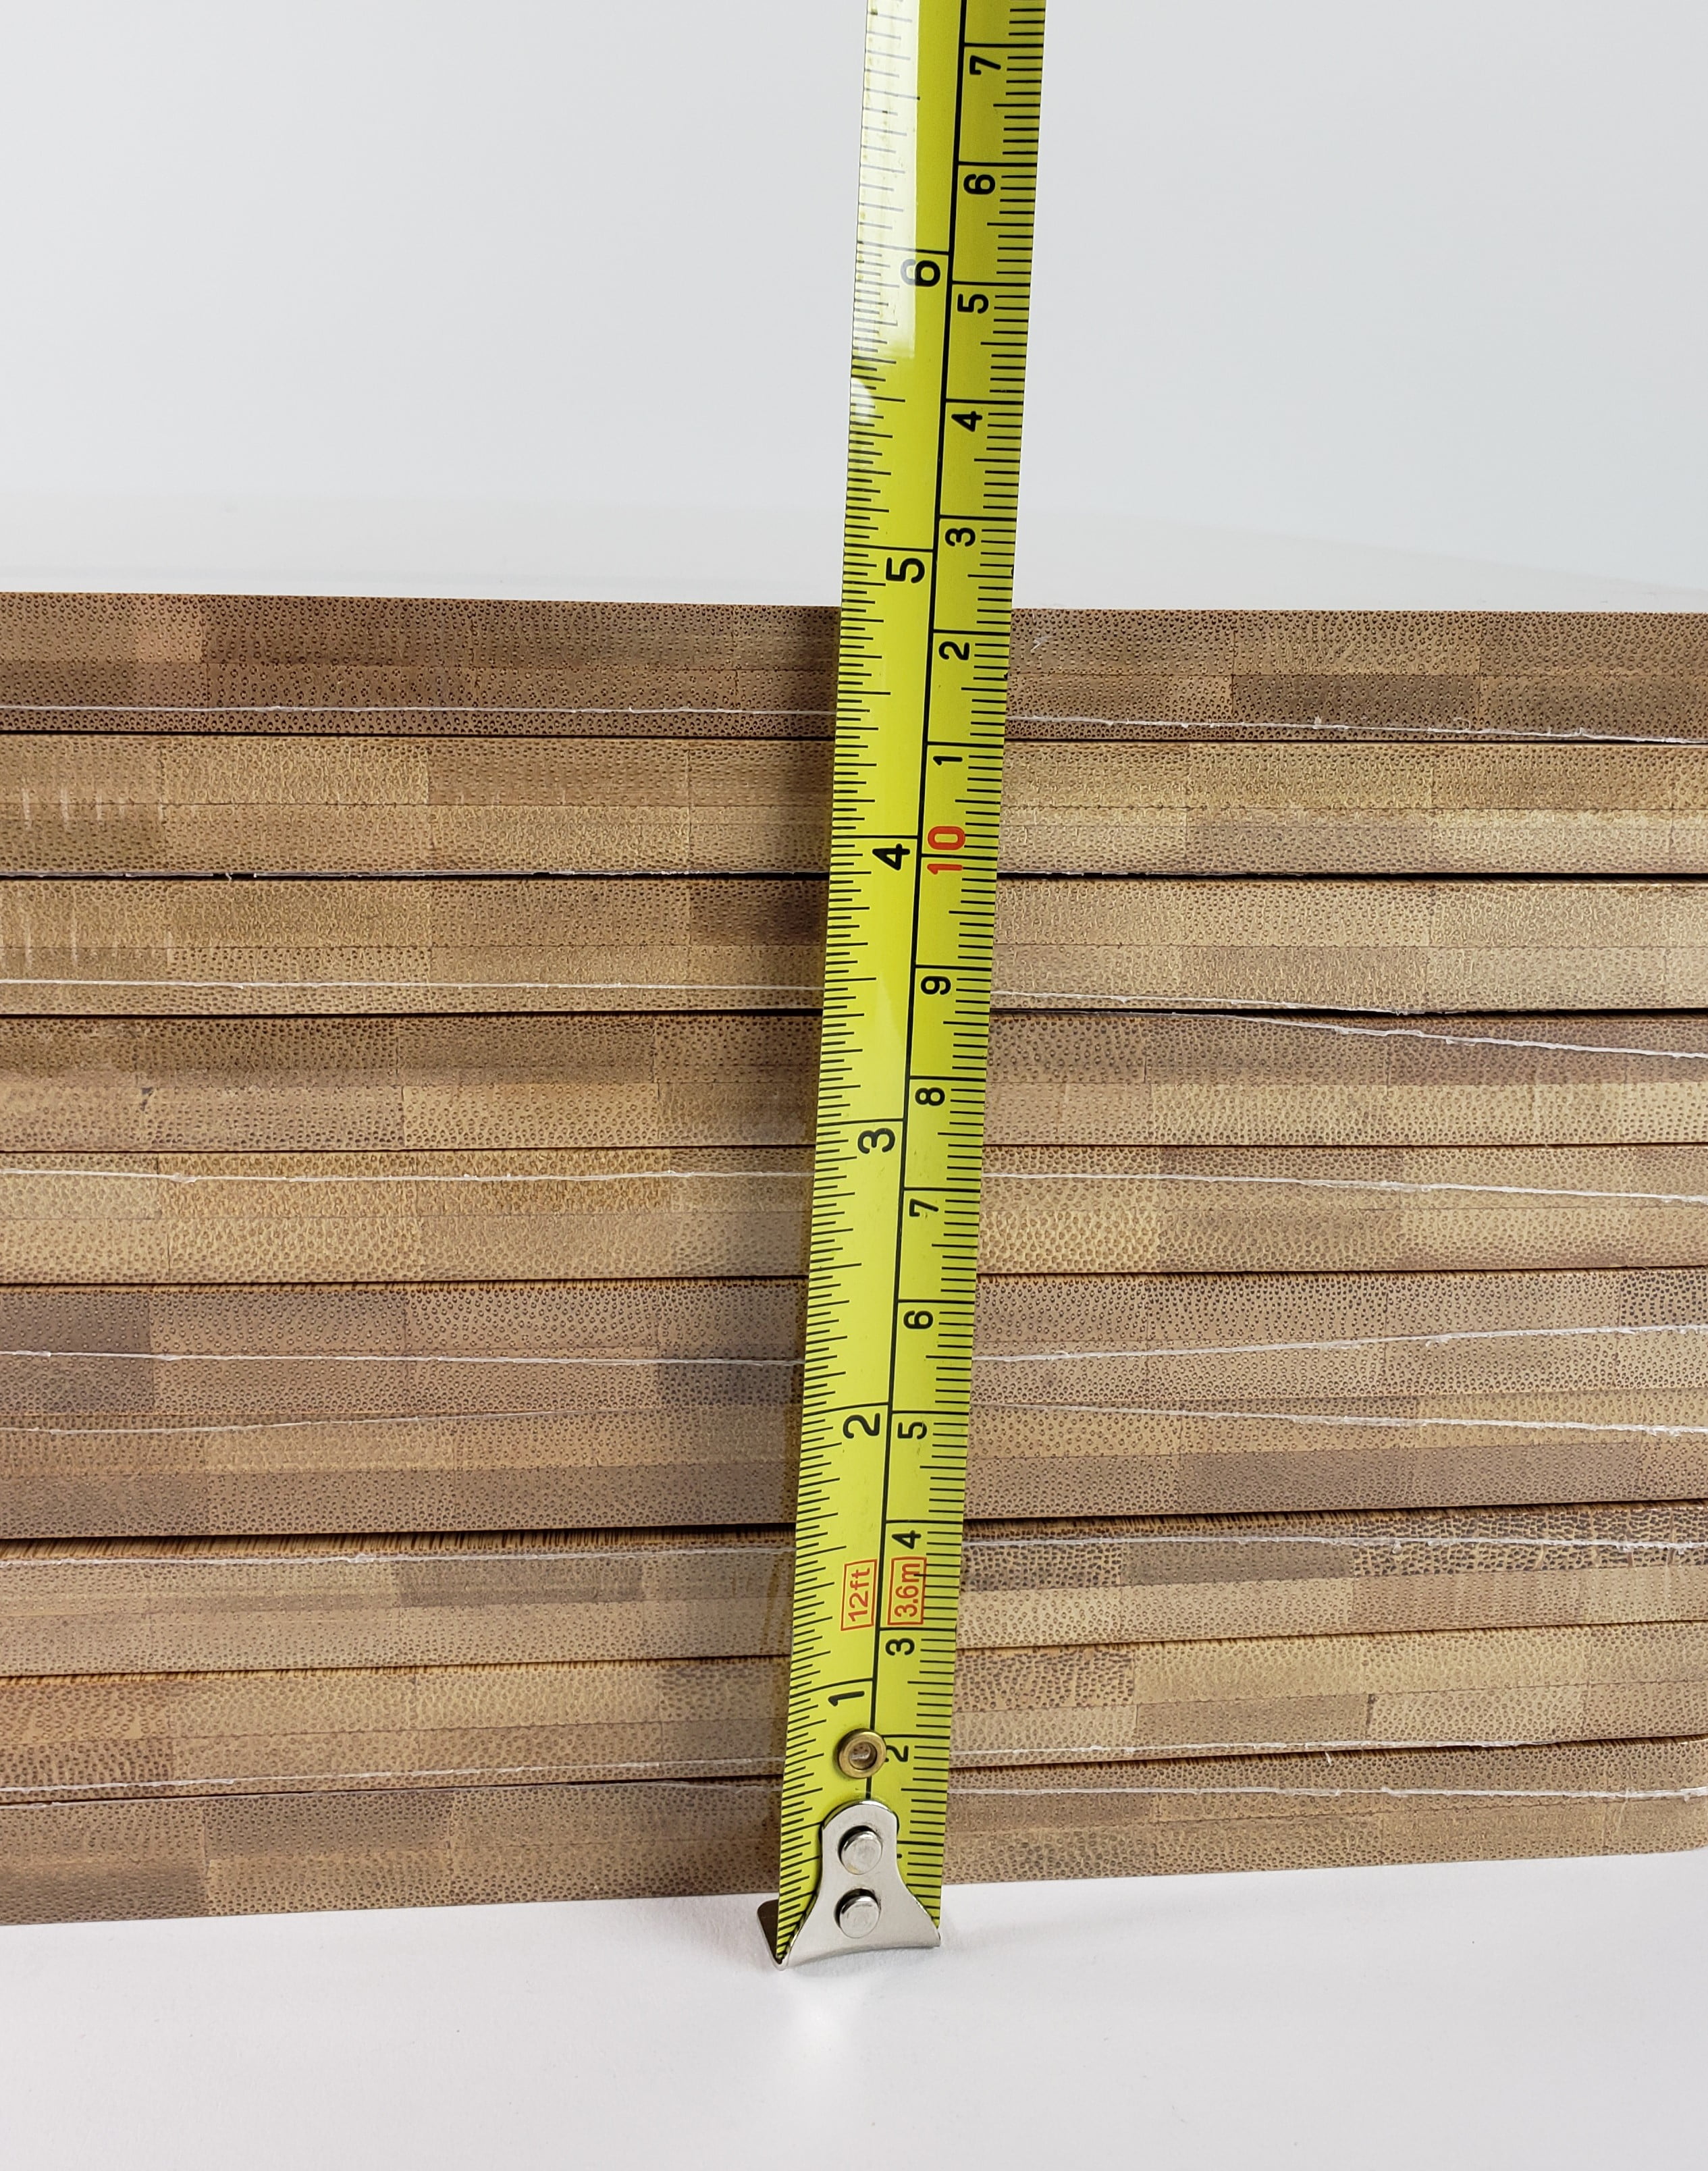 Set of 10) Thick 15X11 Bulk Plain Bamboo Cutting Boards for your store